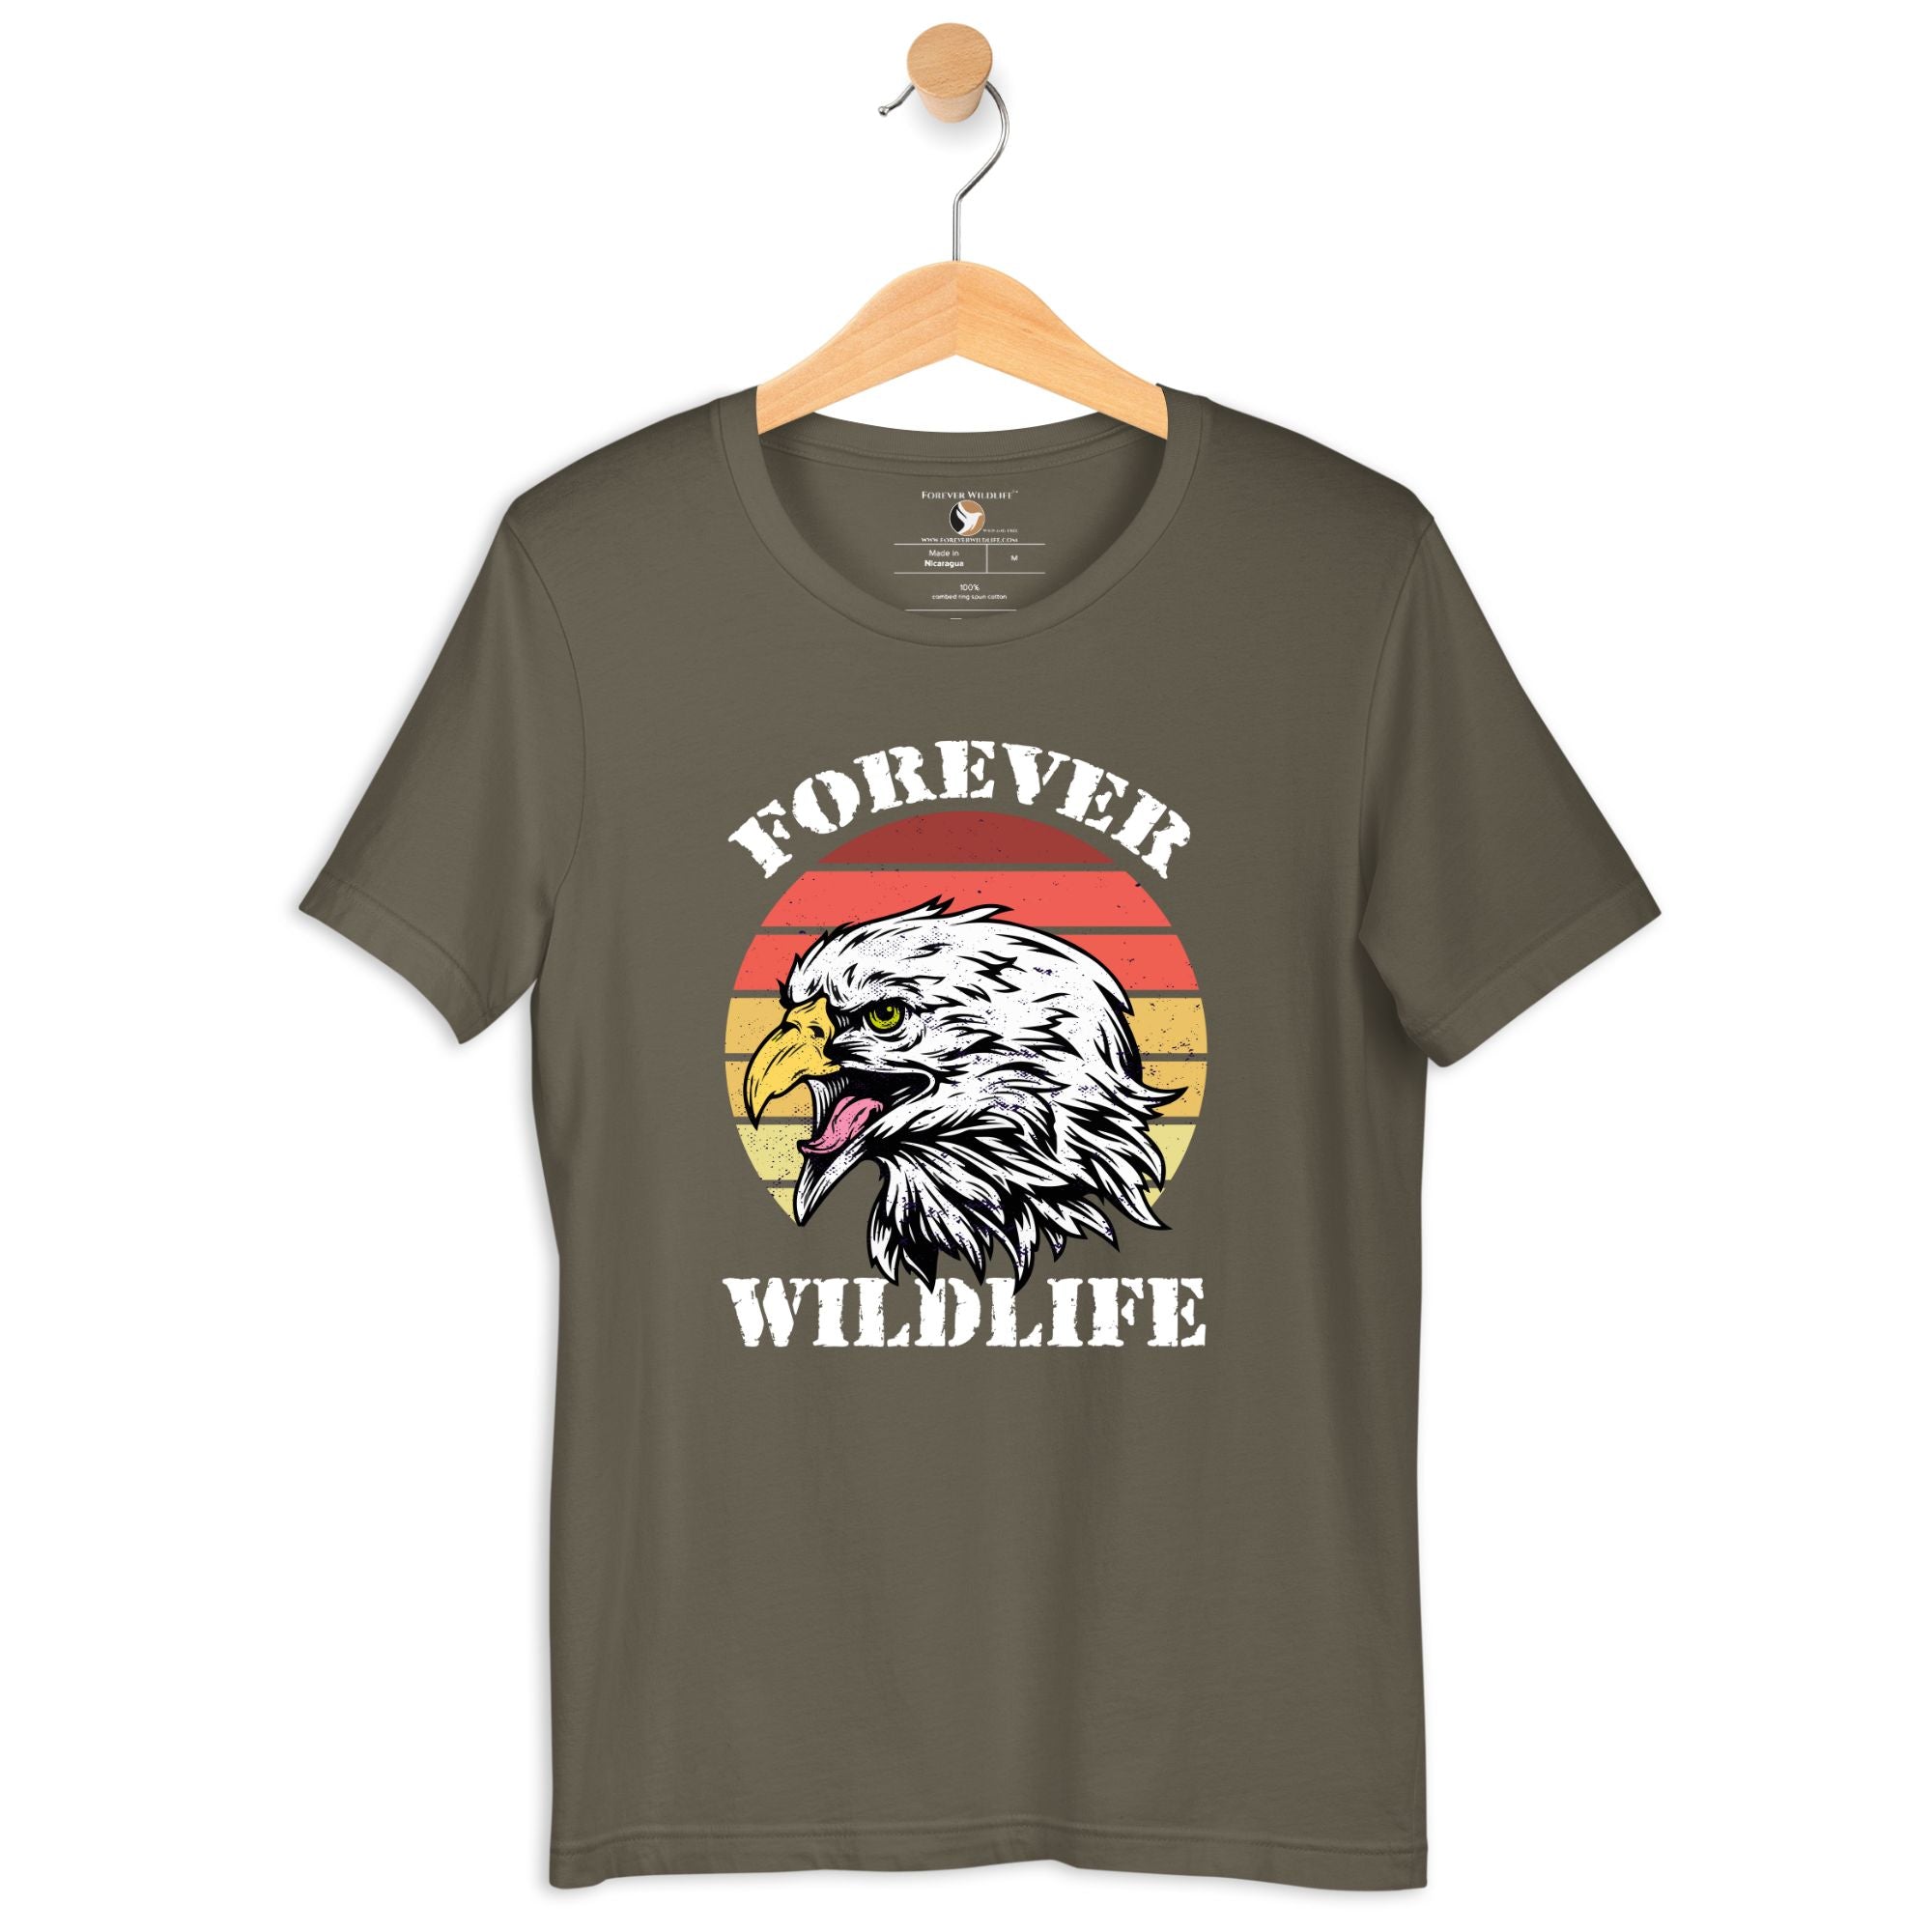 Eagle T-Shirt in Army – Premium Wildlife T-Shirt Design, Eagle Shirts and Wildlife Clothing from Forever Wildlife